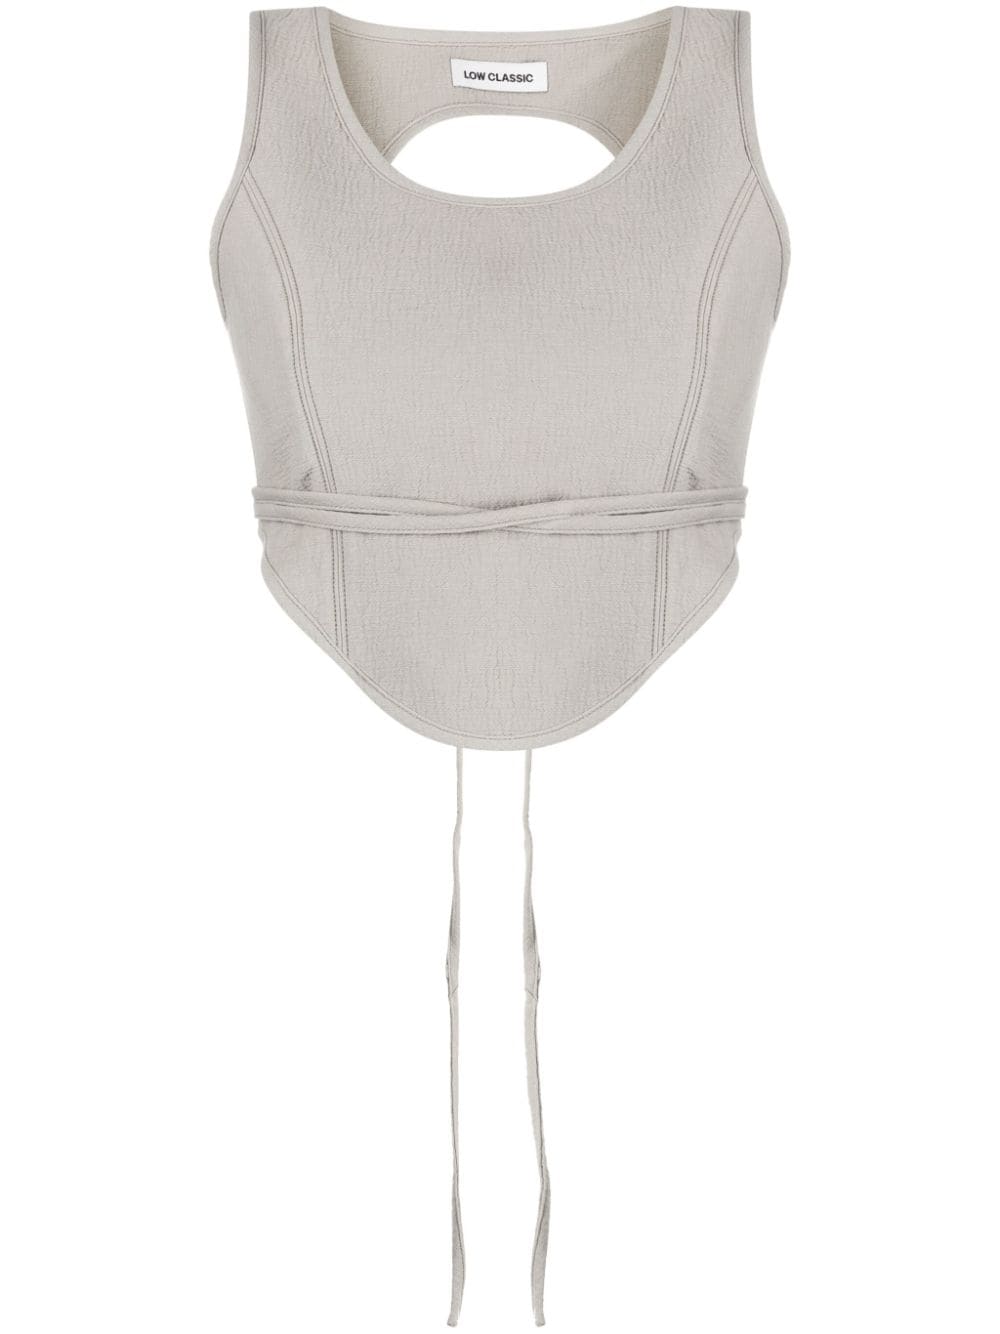 Low Classic cropped corset top - Braun